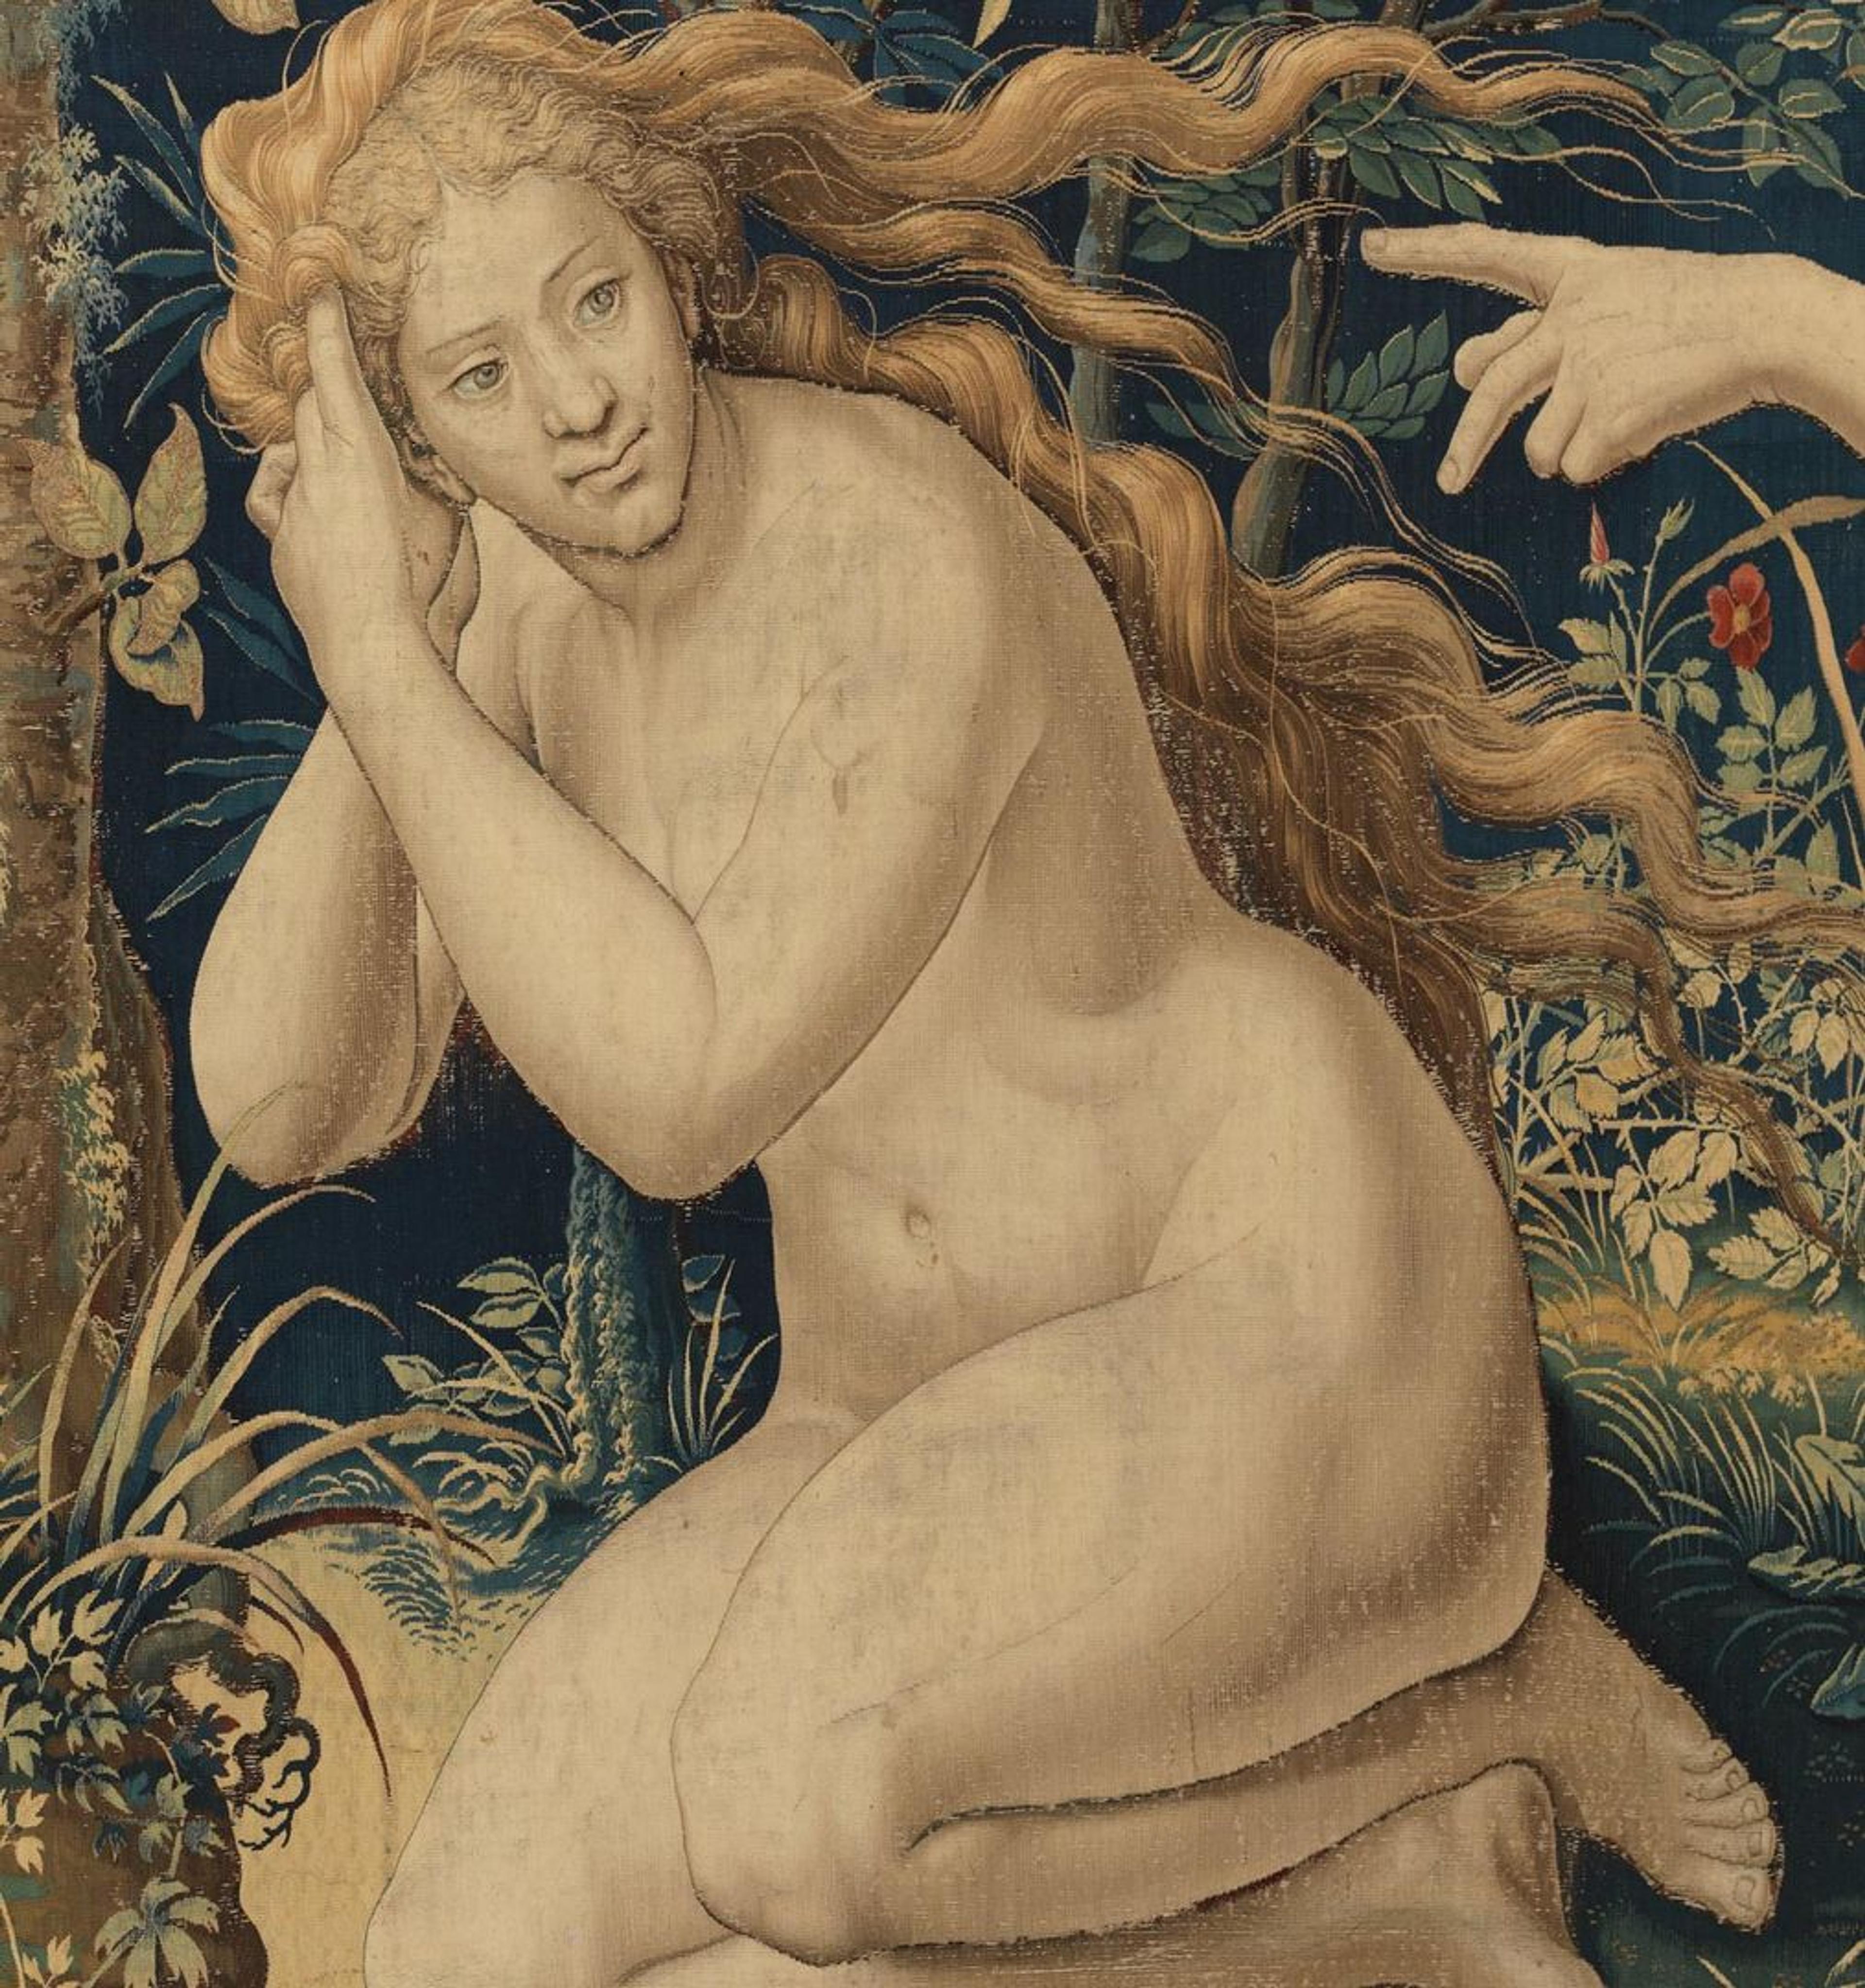 Detail of Eve, from Pieter Coecke van Aeslt's "God Accuses Adam and Eve after the Fall tapestry in a set of The Story of Creation"